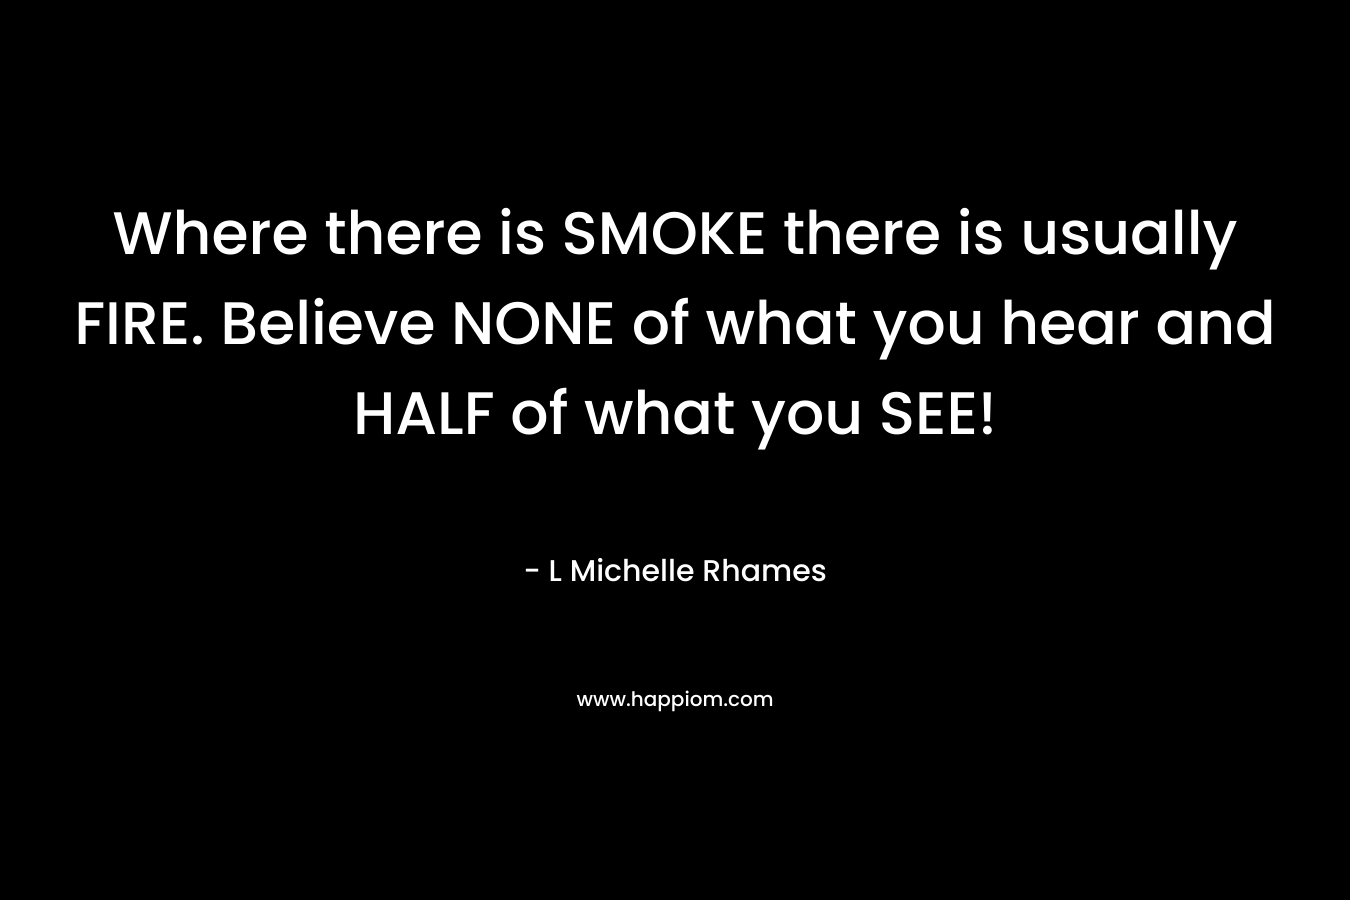 Where there is SMOKE there is usually FIRE. Believe NONE of what you hear and HALF of what you SEE!